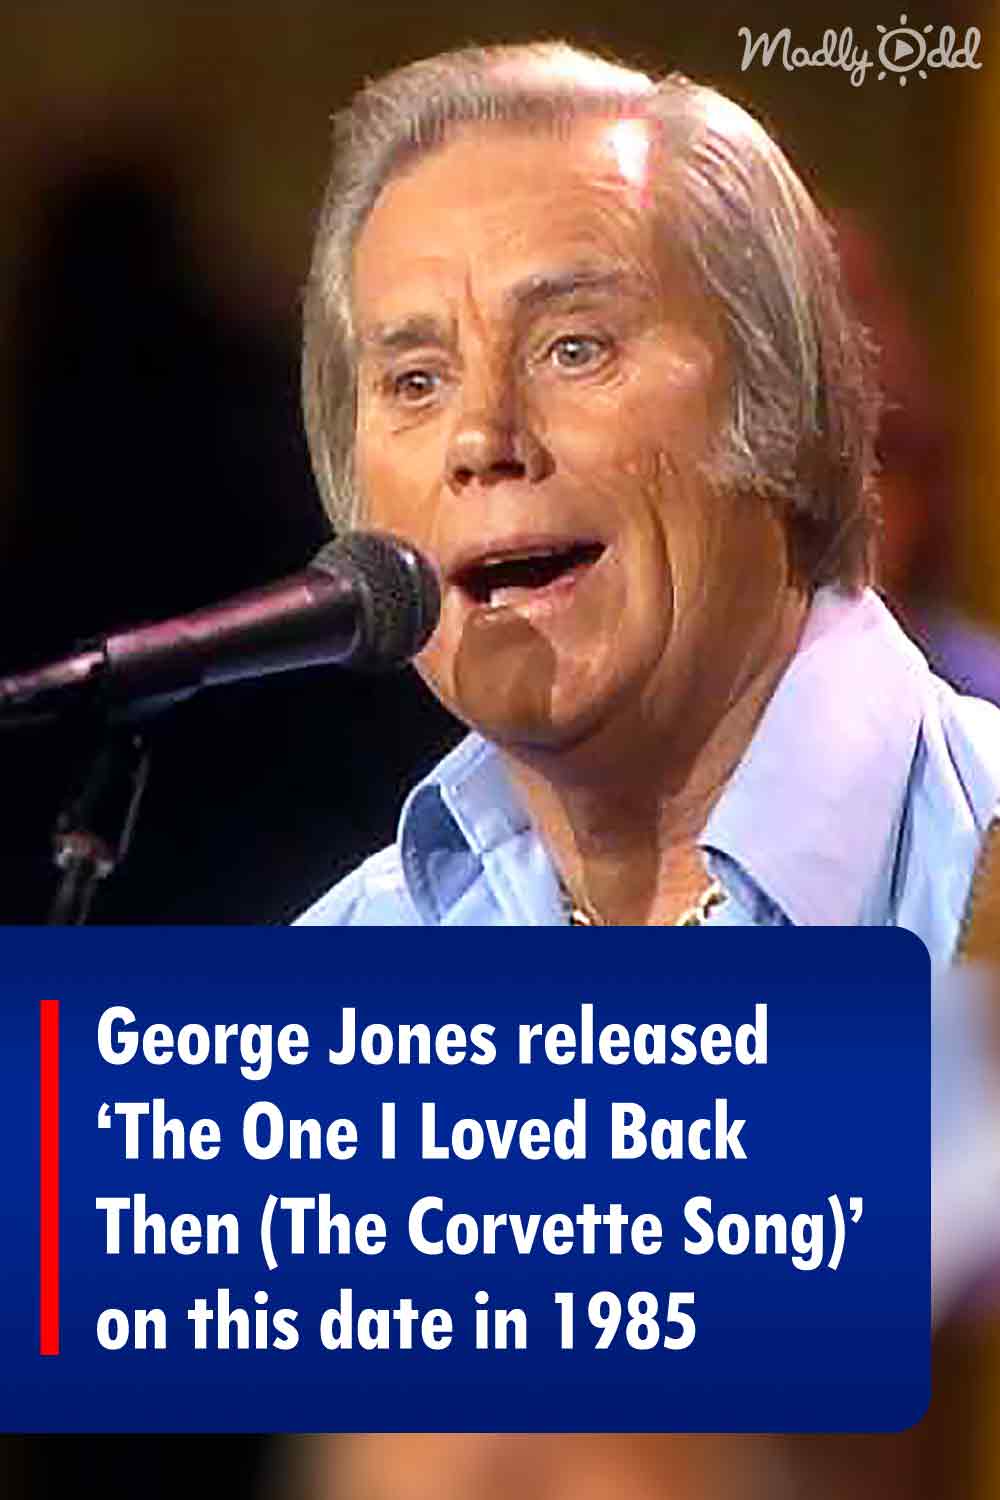 George Jones released ‘The One I Loved Back Then (The Corvette Song)’ on this date in 1985